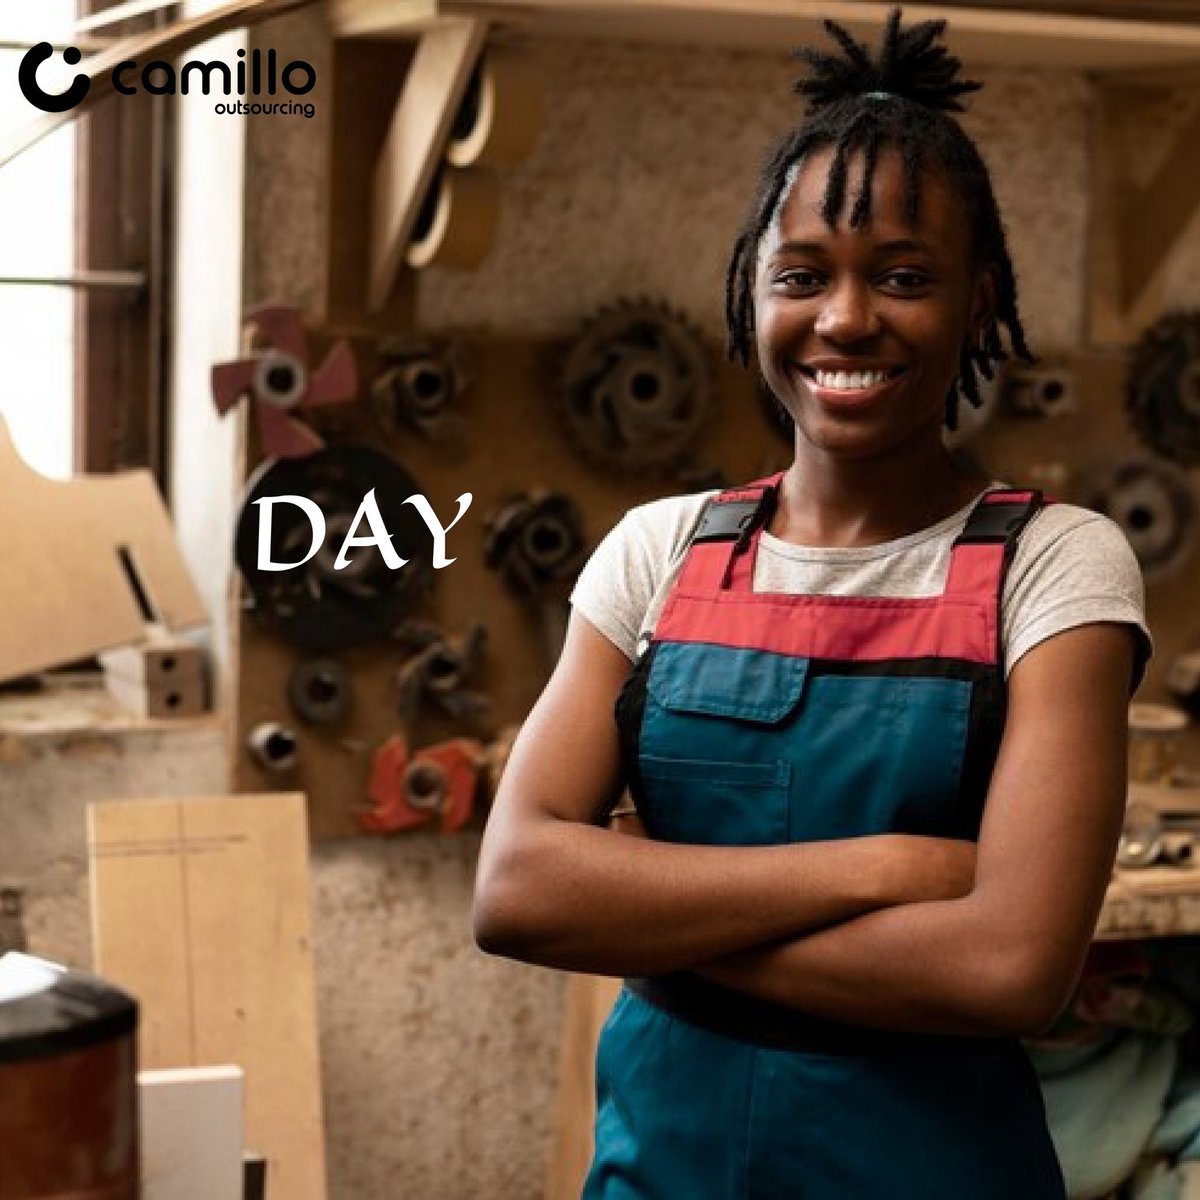 Happy workers day!

We see your dedication and hardwork.

Your reward is surely great.

#camillo #outsource #workers #happyworkersday 
#happyworkersday2024